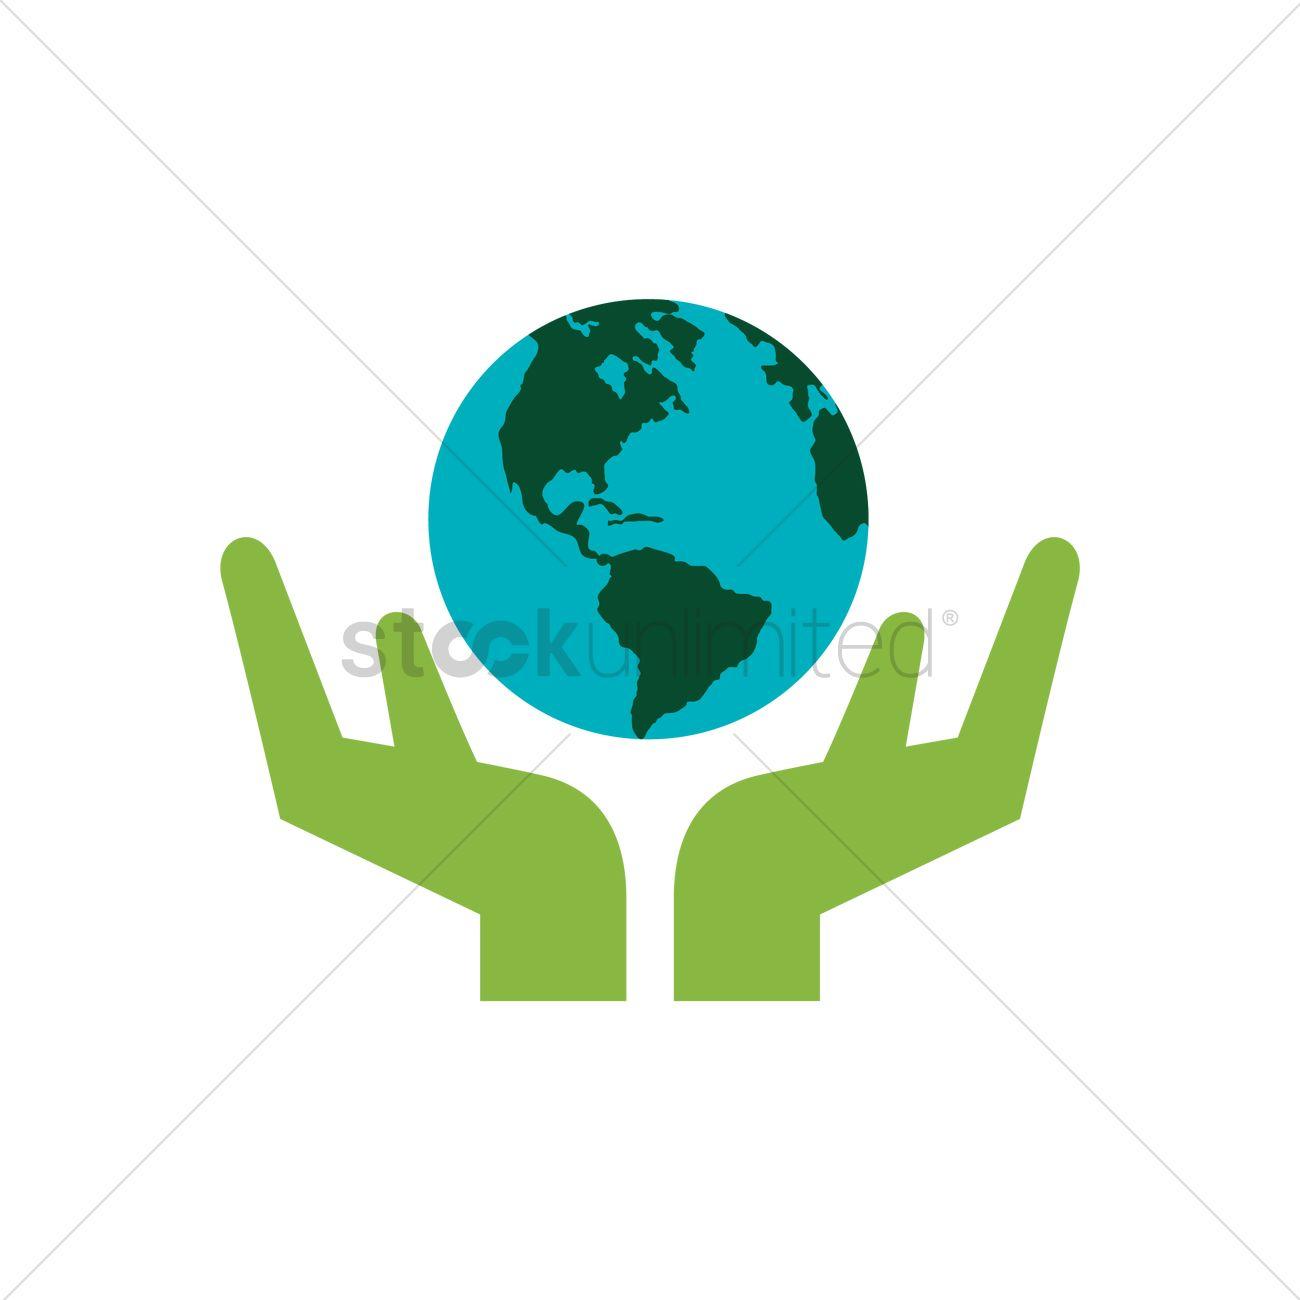 Hands Holding Globe Logo - Hands holding earth Vector Image - 1295065 | StockUnlimited